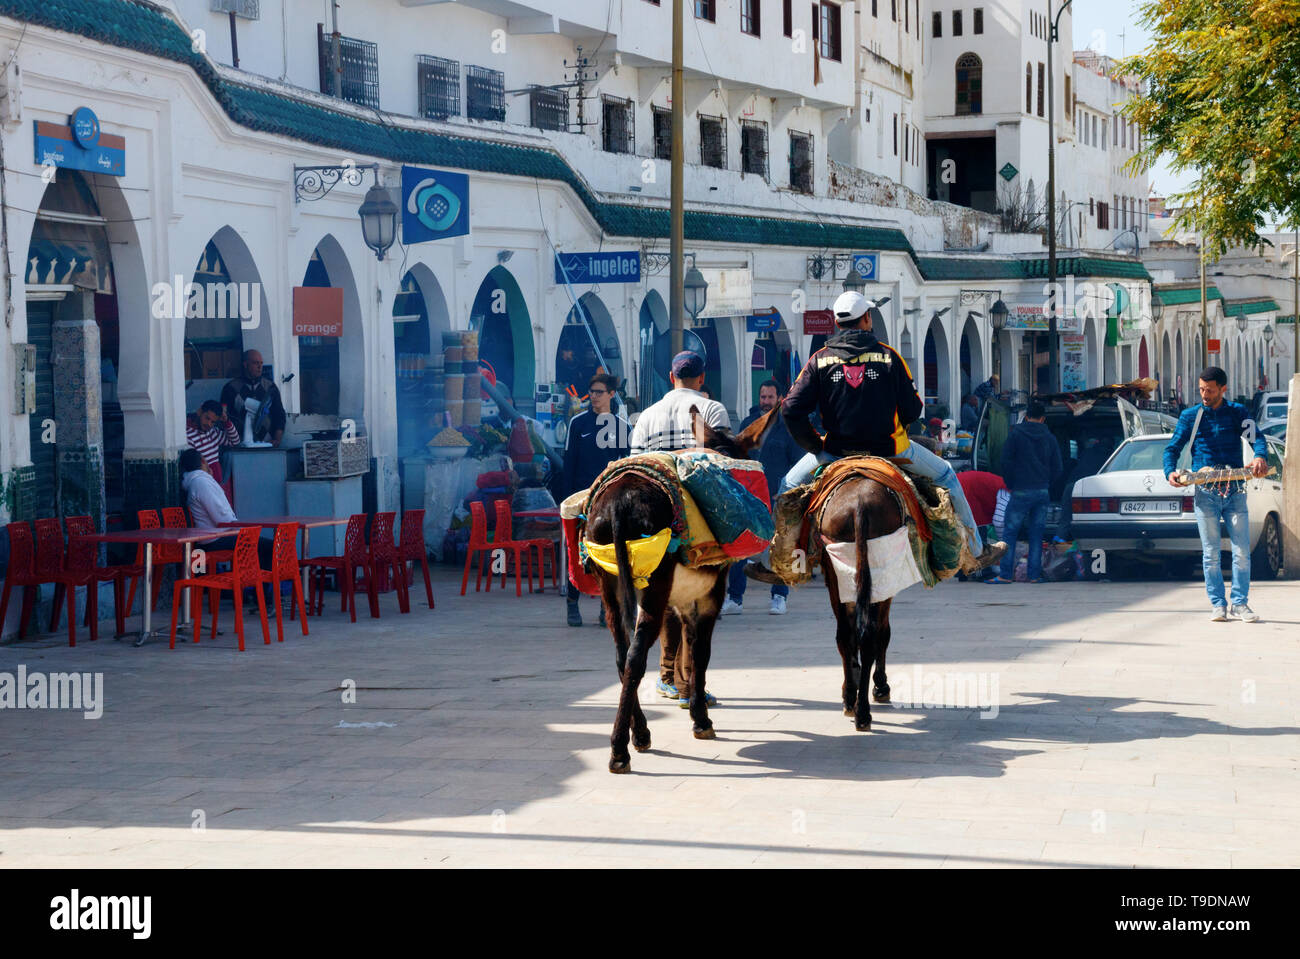 Main square of Moulay Idriss with shops, bars and two men with donkeys walking along the arcade on a sunny day. Moulay Idriss Zerhoun, Morocco Stock Photo